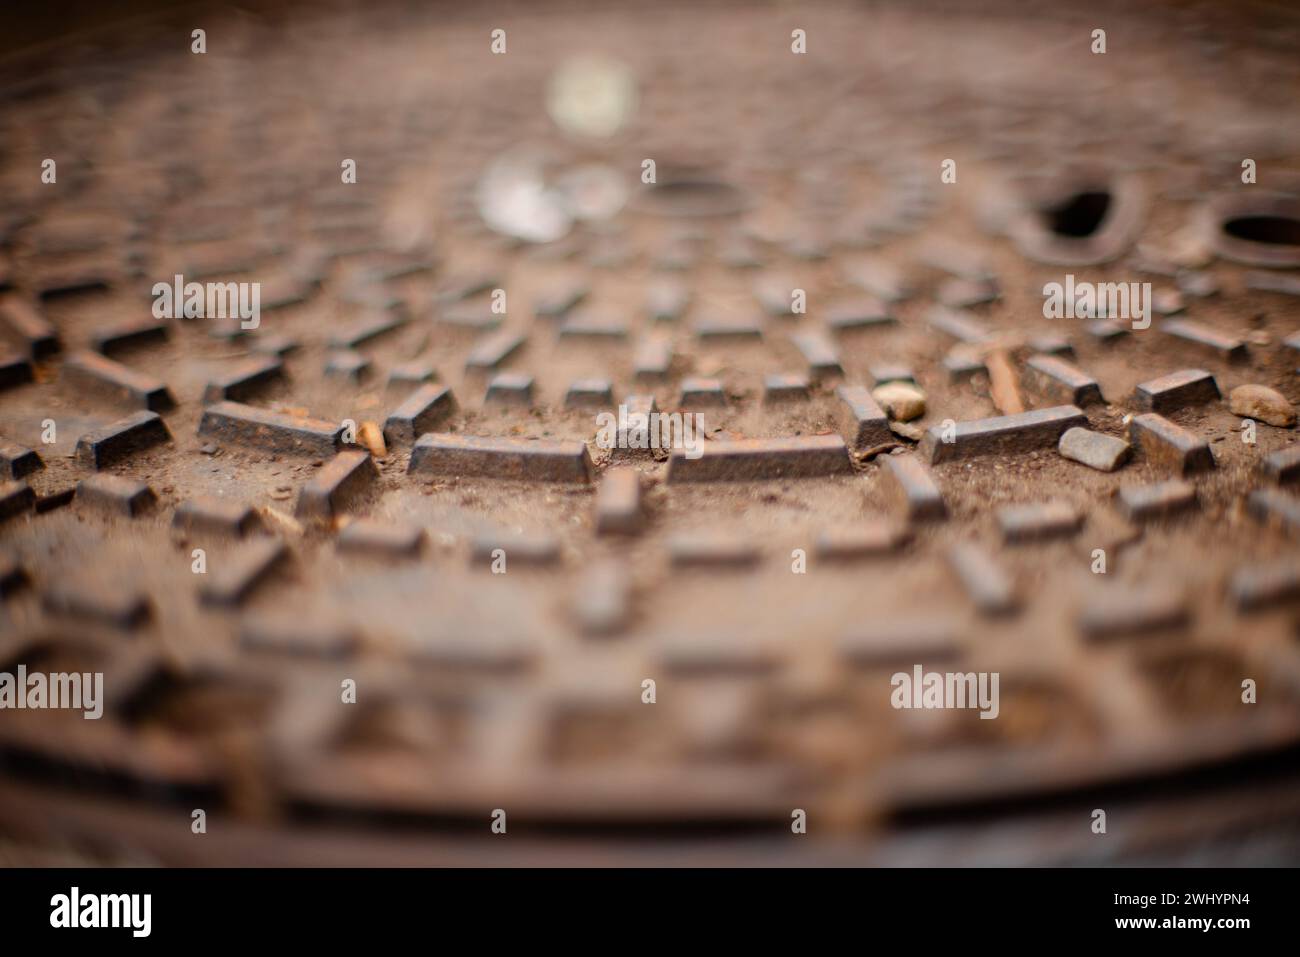 Old, Rusty, Sewer Cap, Iron Texture, Shallow Depth of Field, F 1.2, Decay, Urban Decay, Worn, Weathered, Deterioration Stock Photo